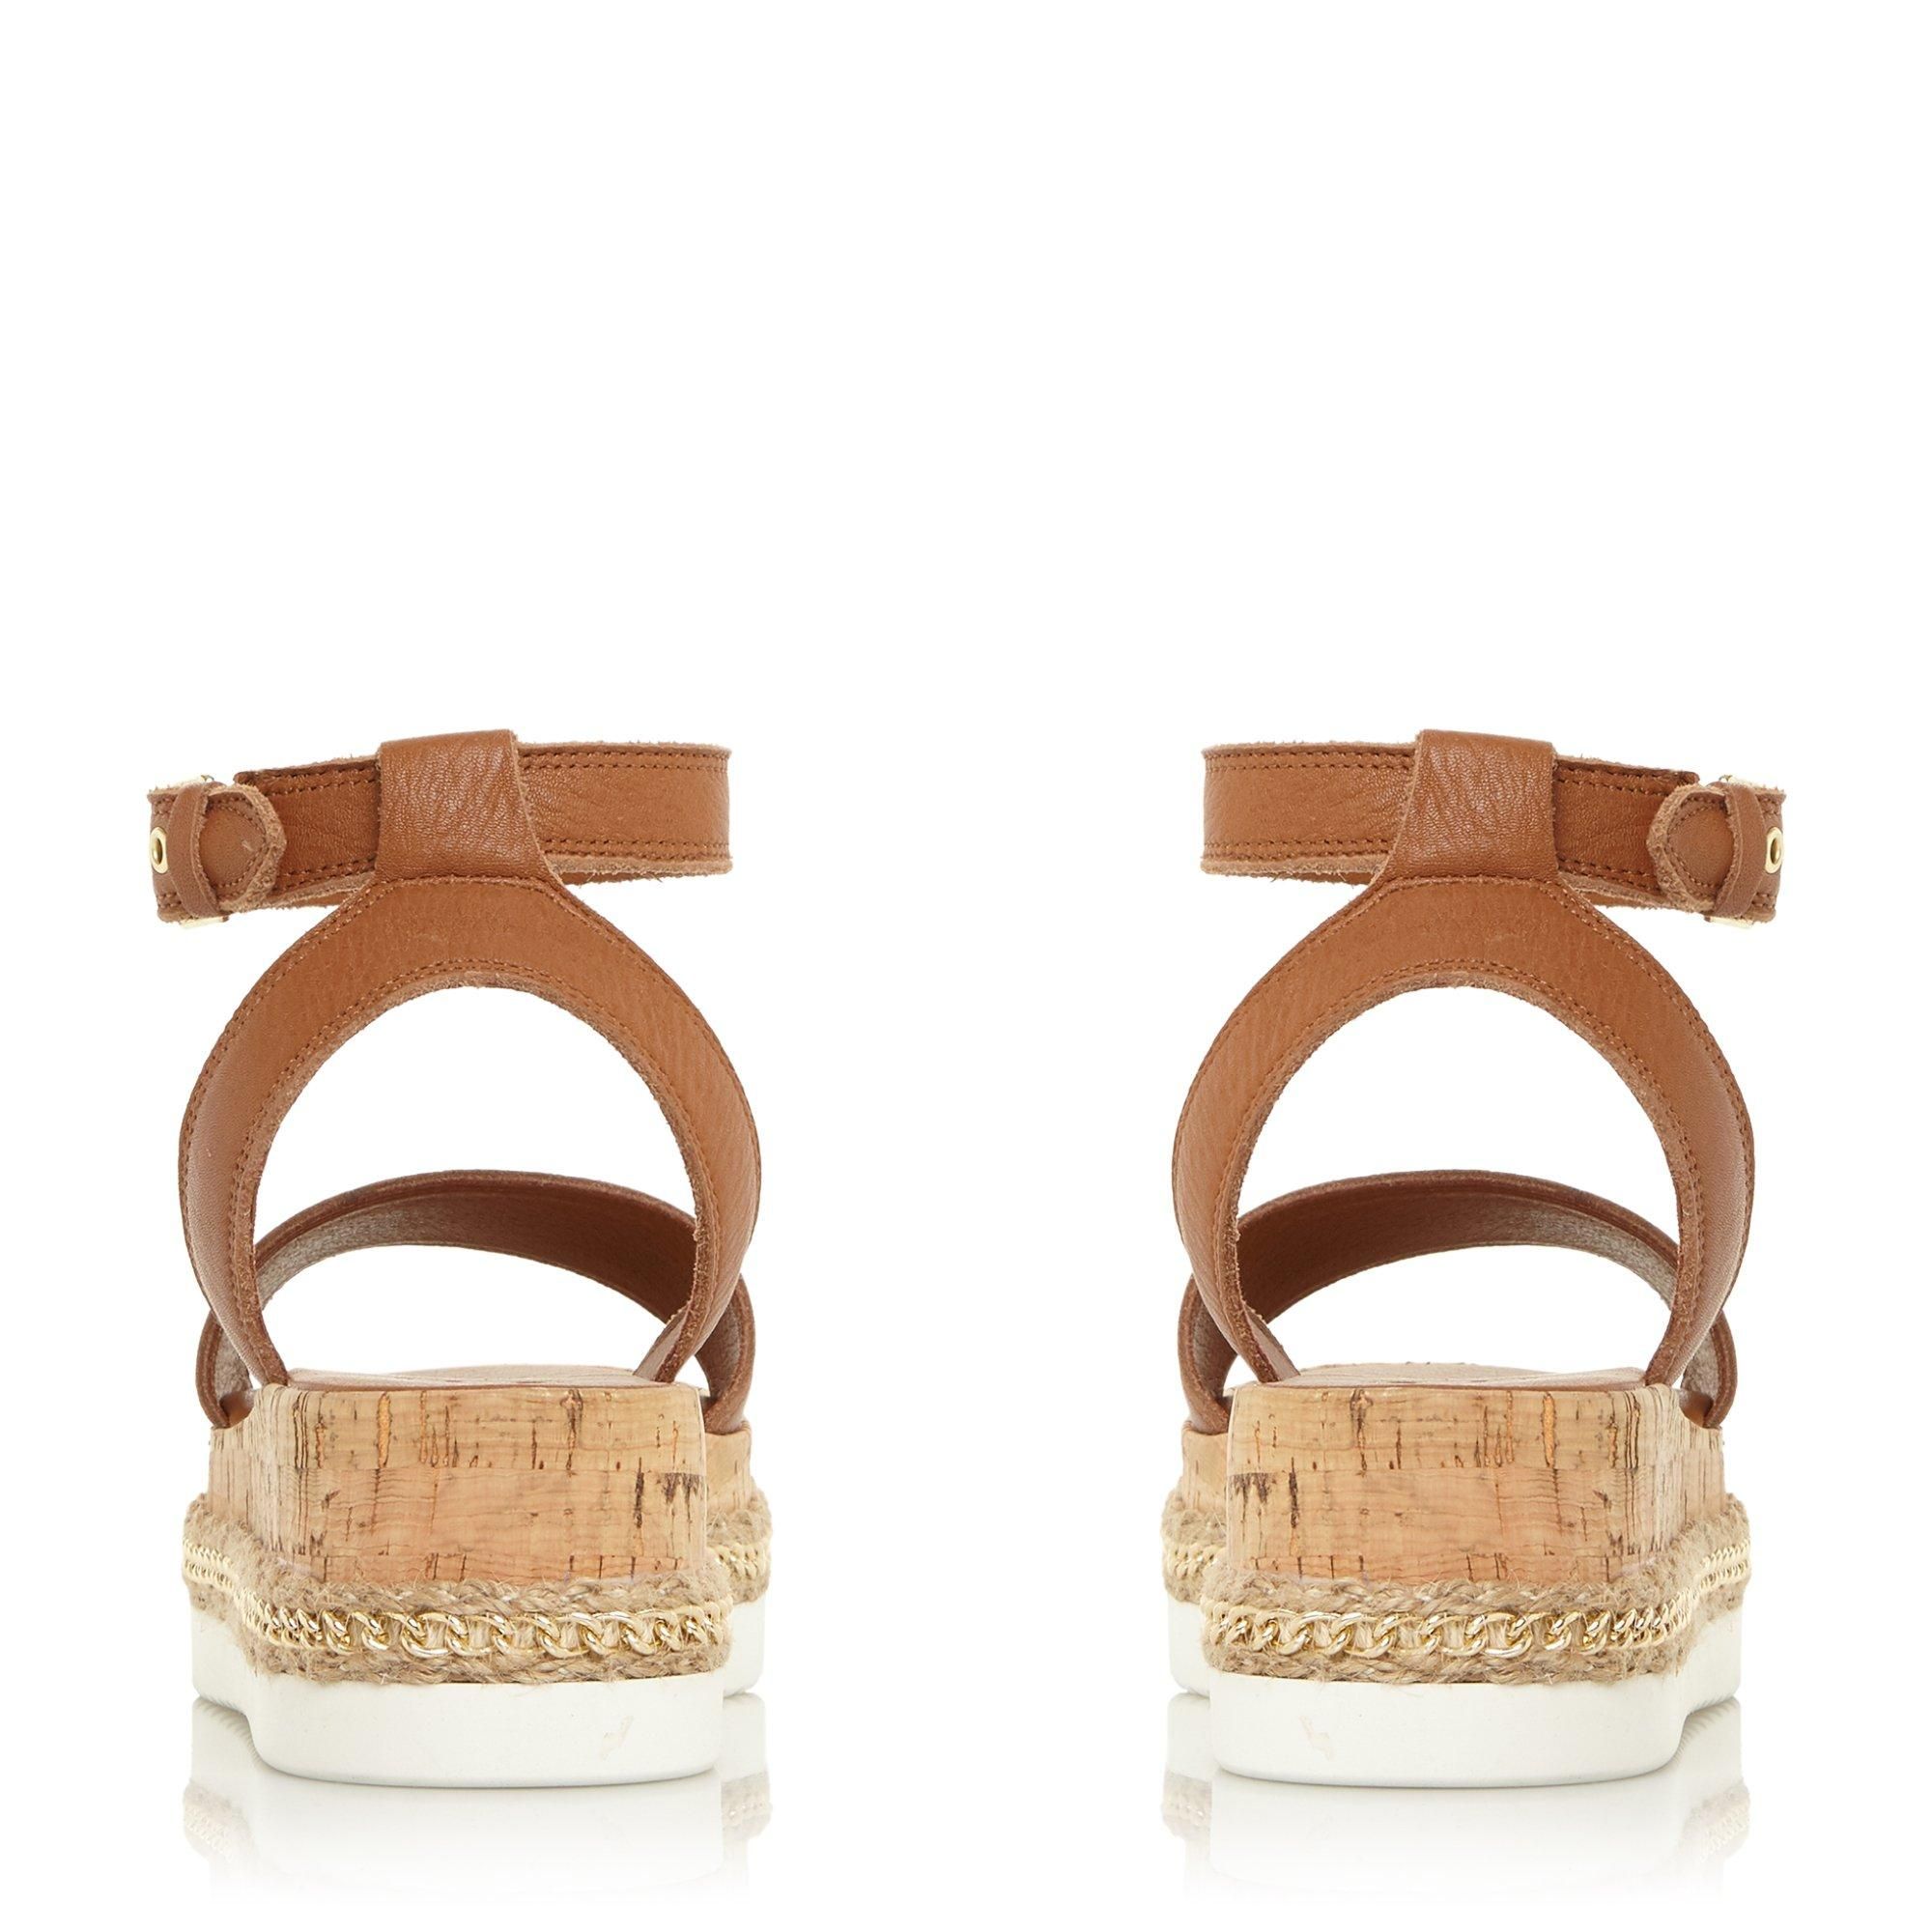 Refresh your summertime styling with the Krest sandal. It's raised on a medium cork wedge. Complete with an open toe and secure buckle-fastened ankle strap.